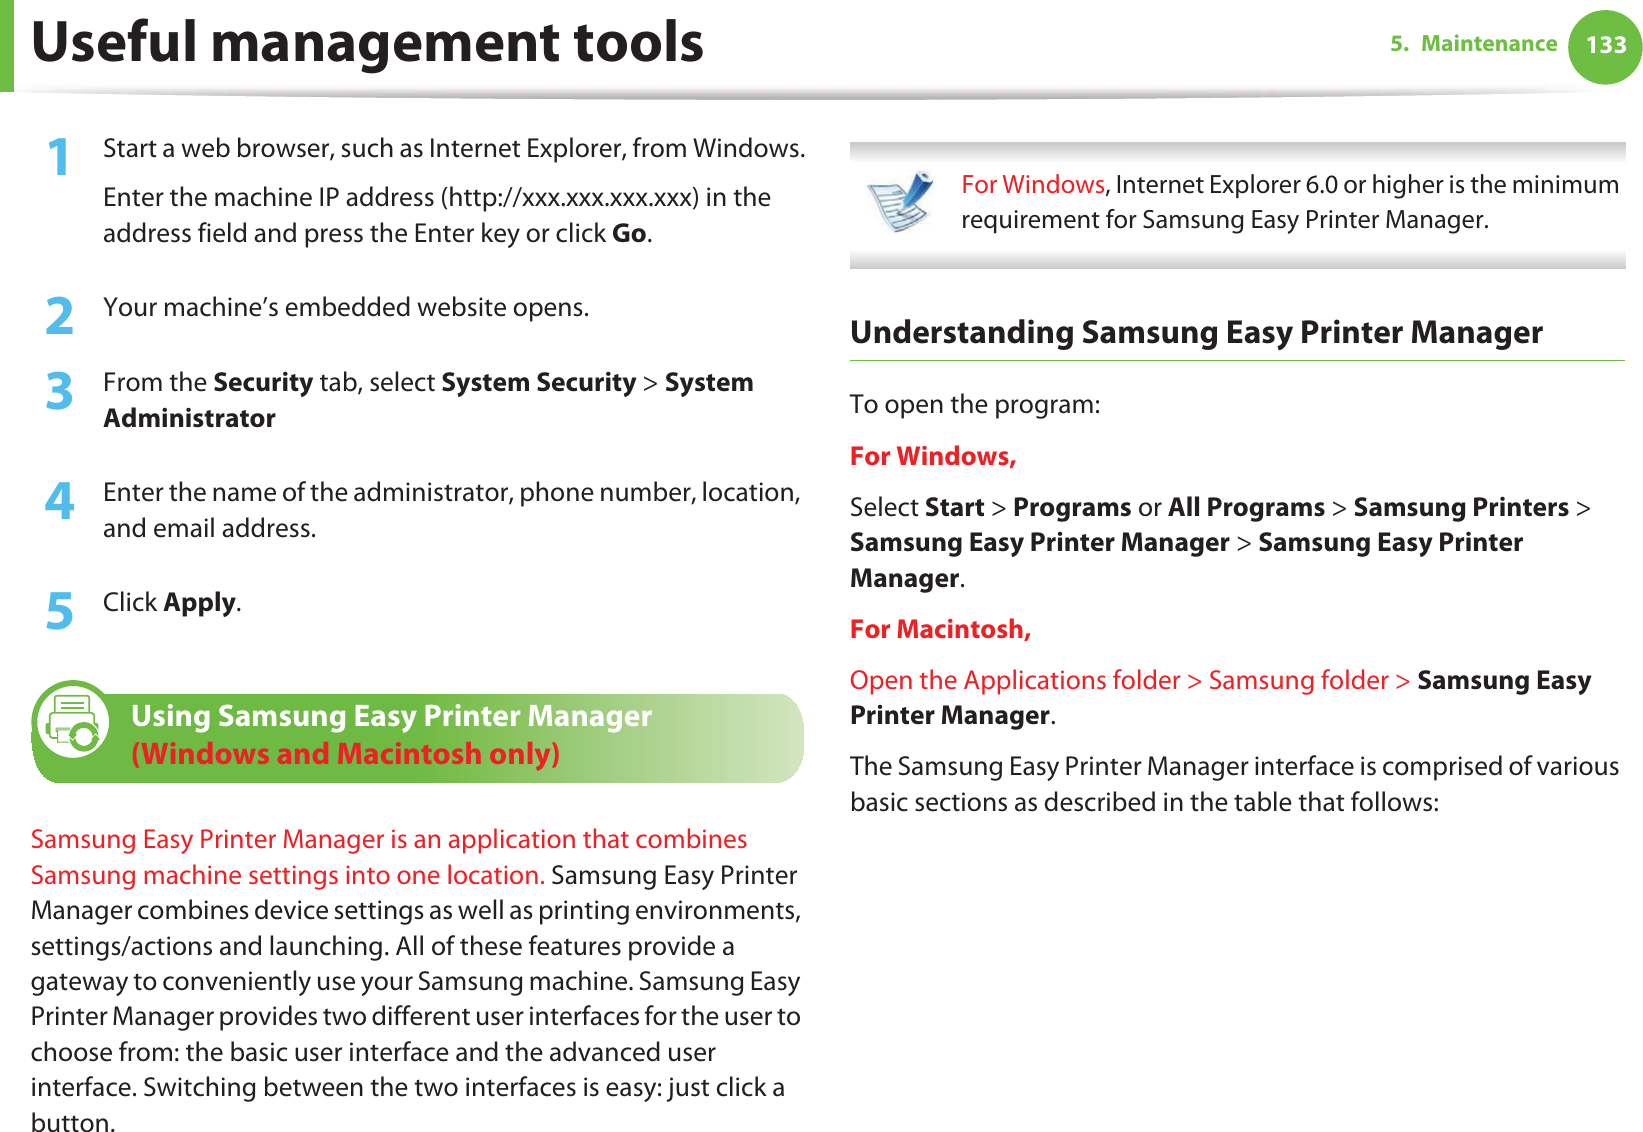 Useful management tools 1335. Maintenance1Start a web browser, such as Internet Explorer, from Windows.Enter the machine IP address (http://xxx.xxx.xxx.xxx) in the address field and press the Enter key or click Go.2  Your machine’s embedded website opens.3  From the Security tab, select System Security &gt; System Administrator4  Enter the name of the administrator, phone number, location, and email address. 5  Click Apply. 9 Using Samsung Easy Printer Manager (Windows and Macintosh only)Samsung Easy Printer Manager is an application that combines Samsung machine settings into one location. Samsung Easy Printer Manager combines device settings as well as printing environments, settings/actions and launching. All of these features provide a gateway to conveniently use your Samsung machine. Samsung Easy Printer Manager provides two different user interfaces for the user to choose from: the basic user interface and the advanced user interface. Switching between the two interfaces is easy: just click a button. For Windows, Internet Explorer 6.0 or higher is the minimum requirement for Samsung Easy Printer Manager. Understanding Samsung Easy Printer ManagerTo open the program: For Windows,Select Start &gt; Programs or All Programs &gt; Samsung Printers &gt; Samsung Easy Printer Manager &gt; Samsung Easy Printer Manager.For Macintosh,Open the Applications folder &gt; Samsung folder &gt; Samsung Easy Printer Manager.The Samsung Easy Printer Manager interface is comprised of various basic sections as described in the table that follows: